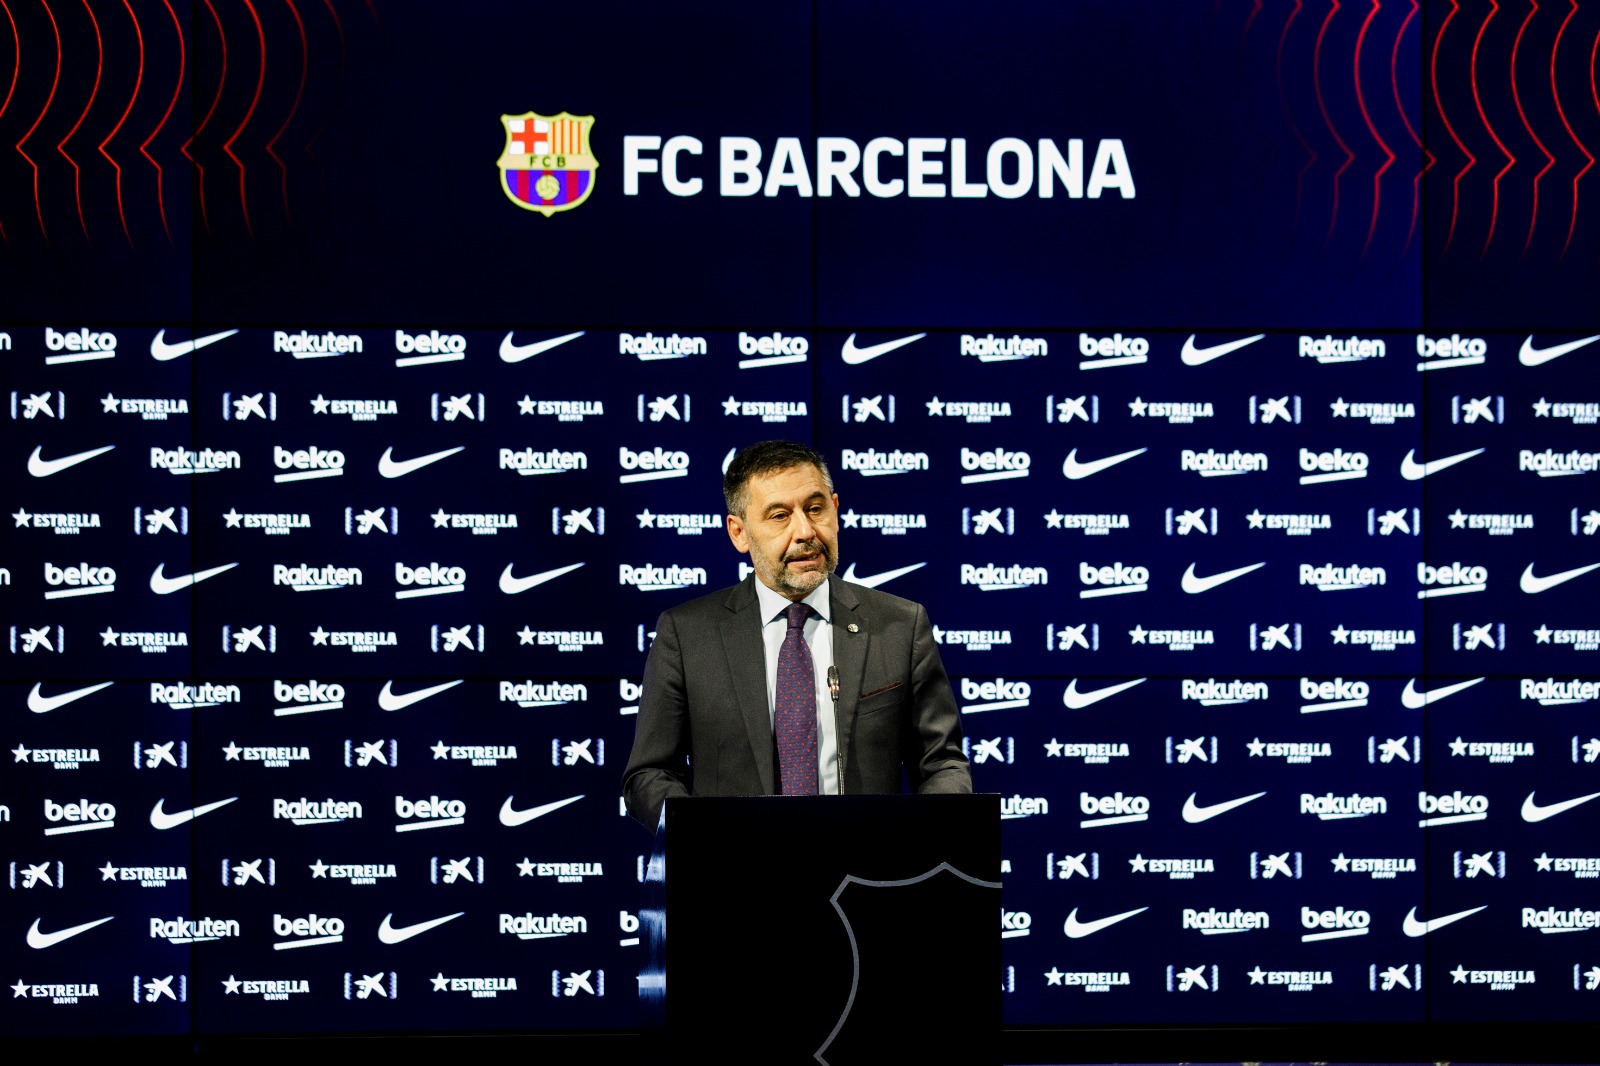 Barcelona have approved requirements to participate in European Super League, proclaims Josep Maria Bartomeu